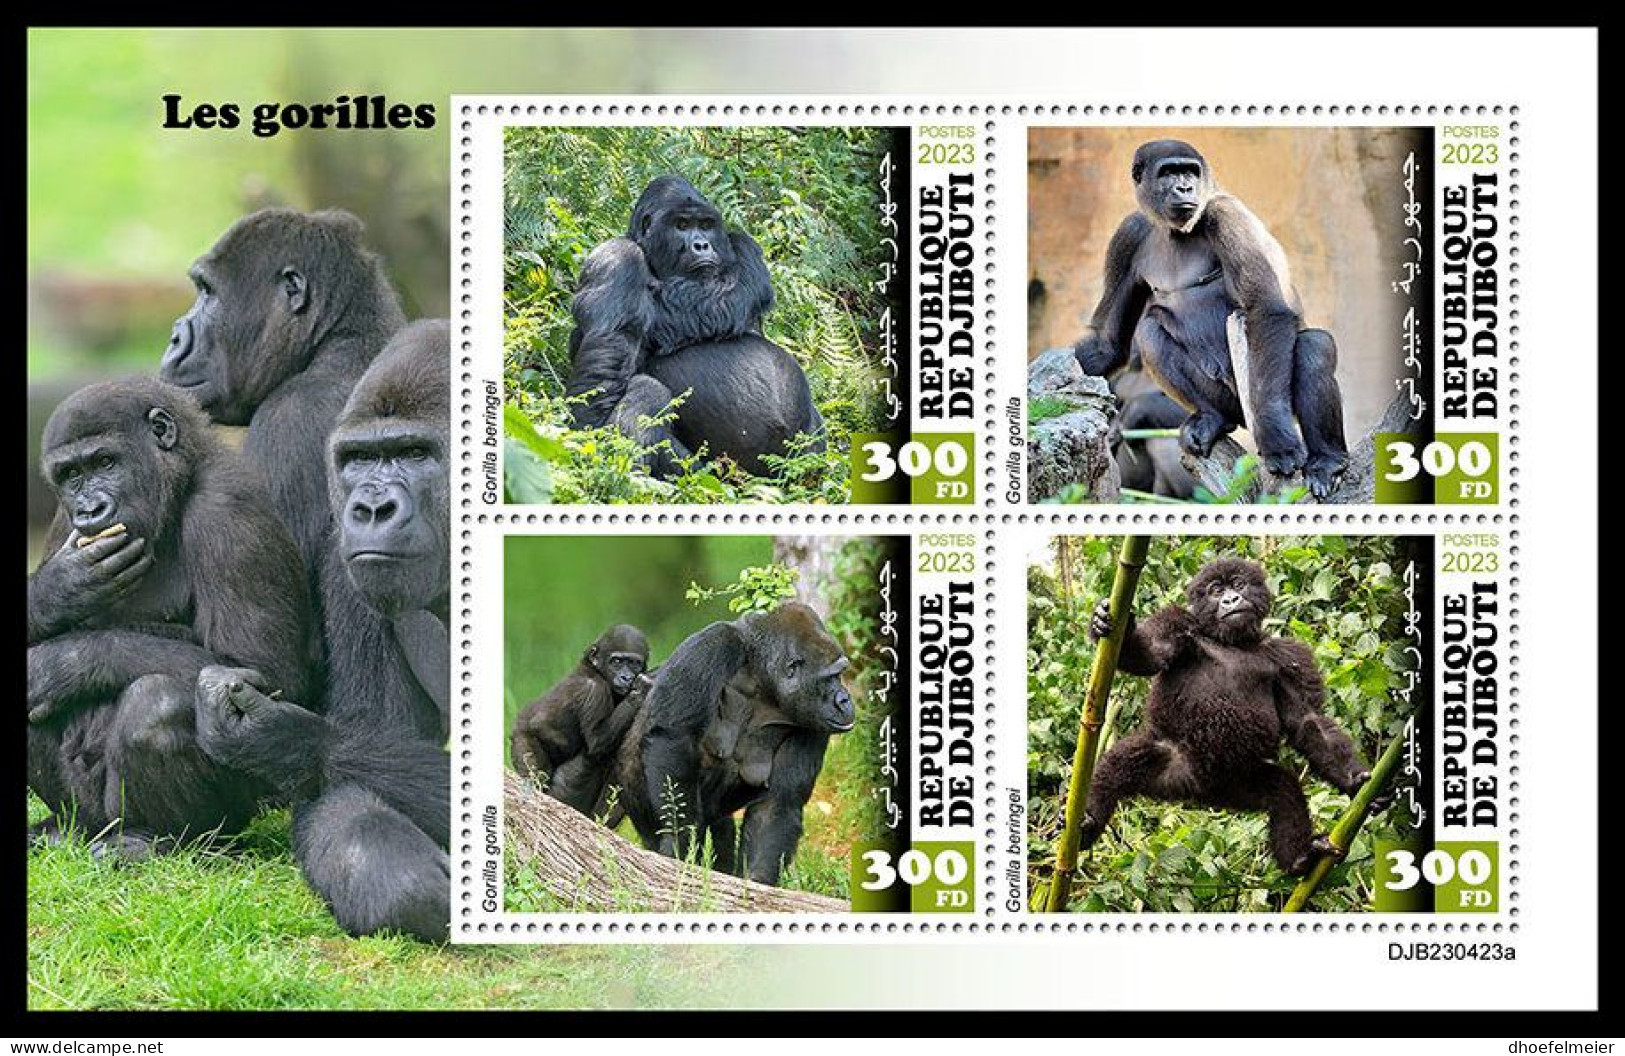 DJIBOUTI 2023 MNH Gorillas M/S – OFFICIAL ISSUE – DHQ2403 - Gorilles